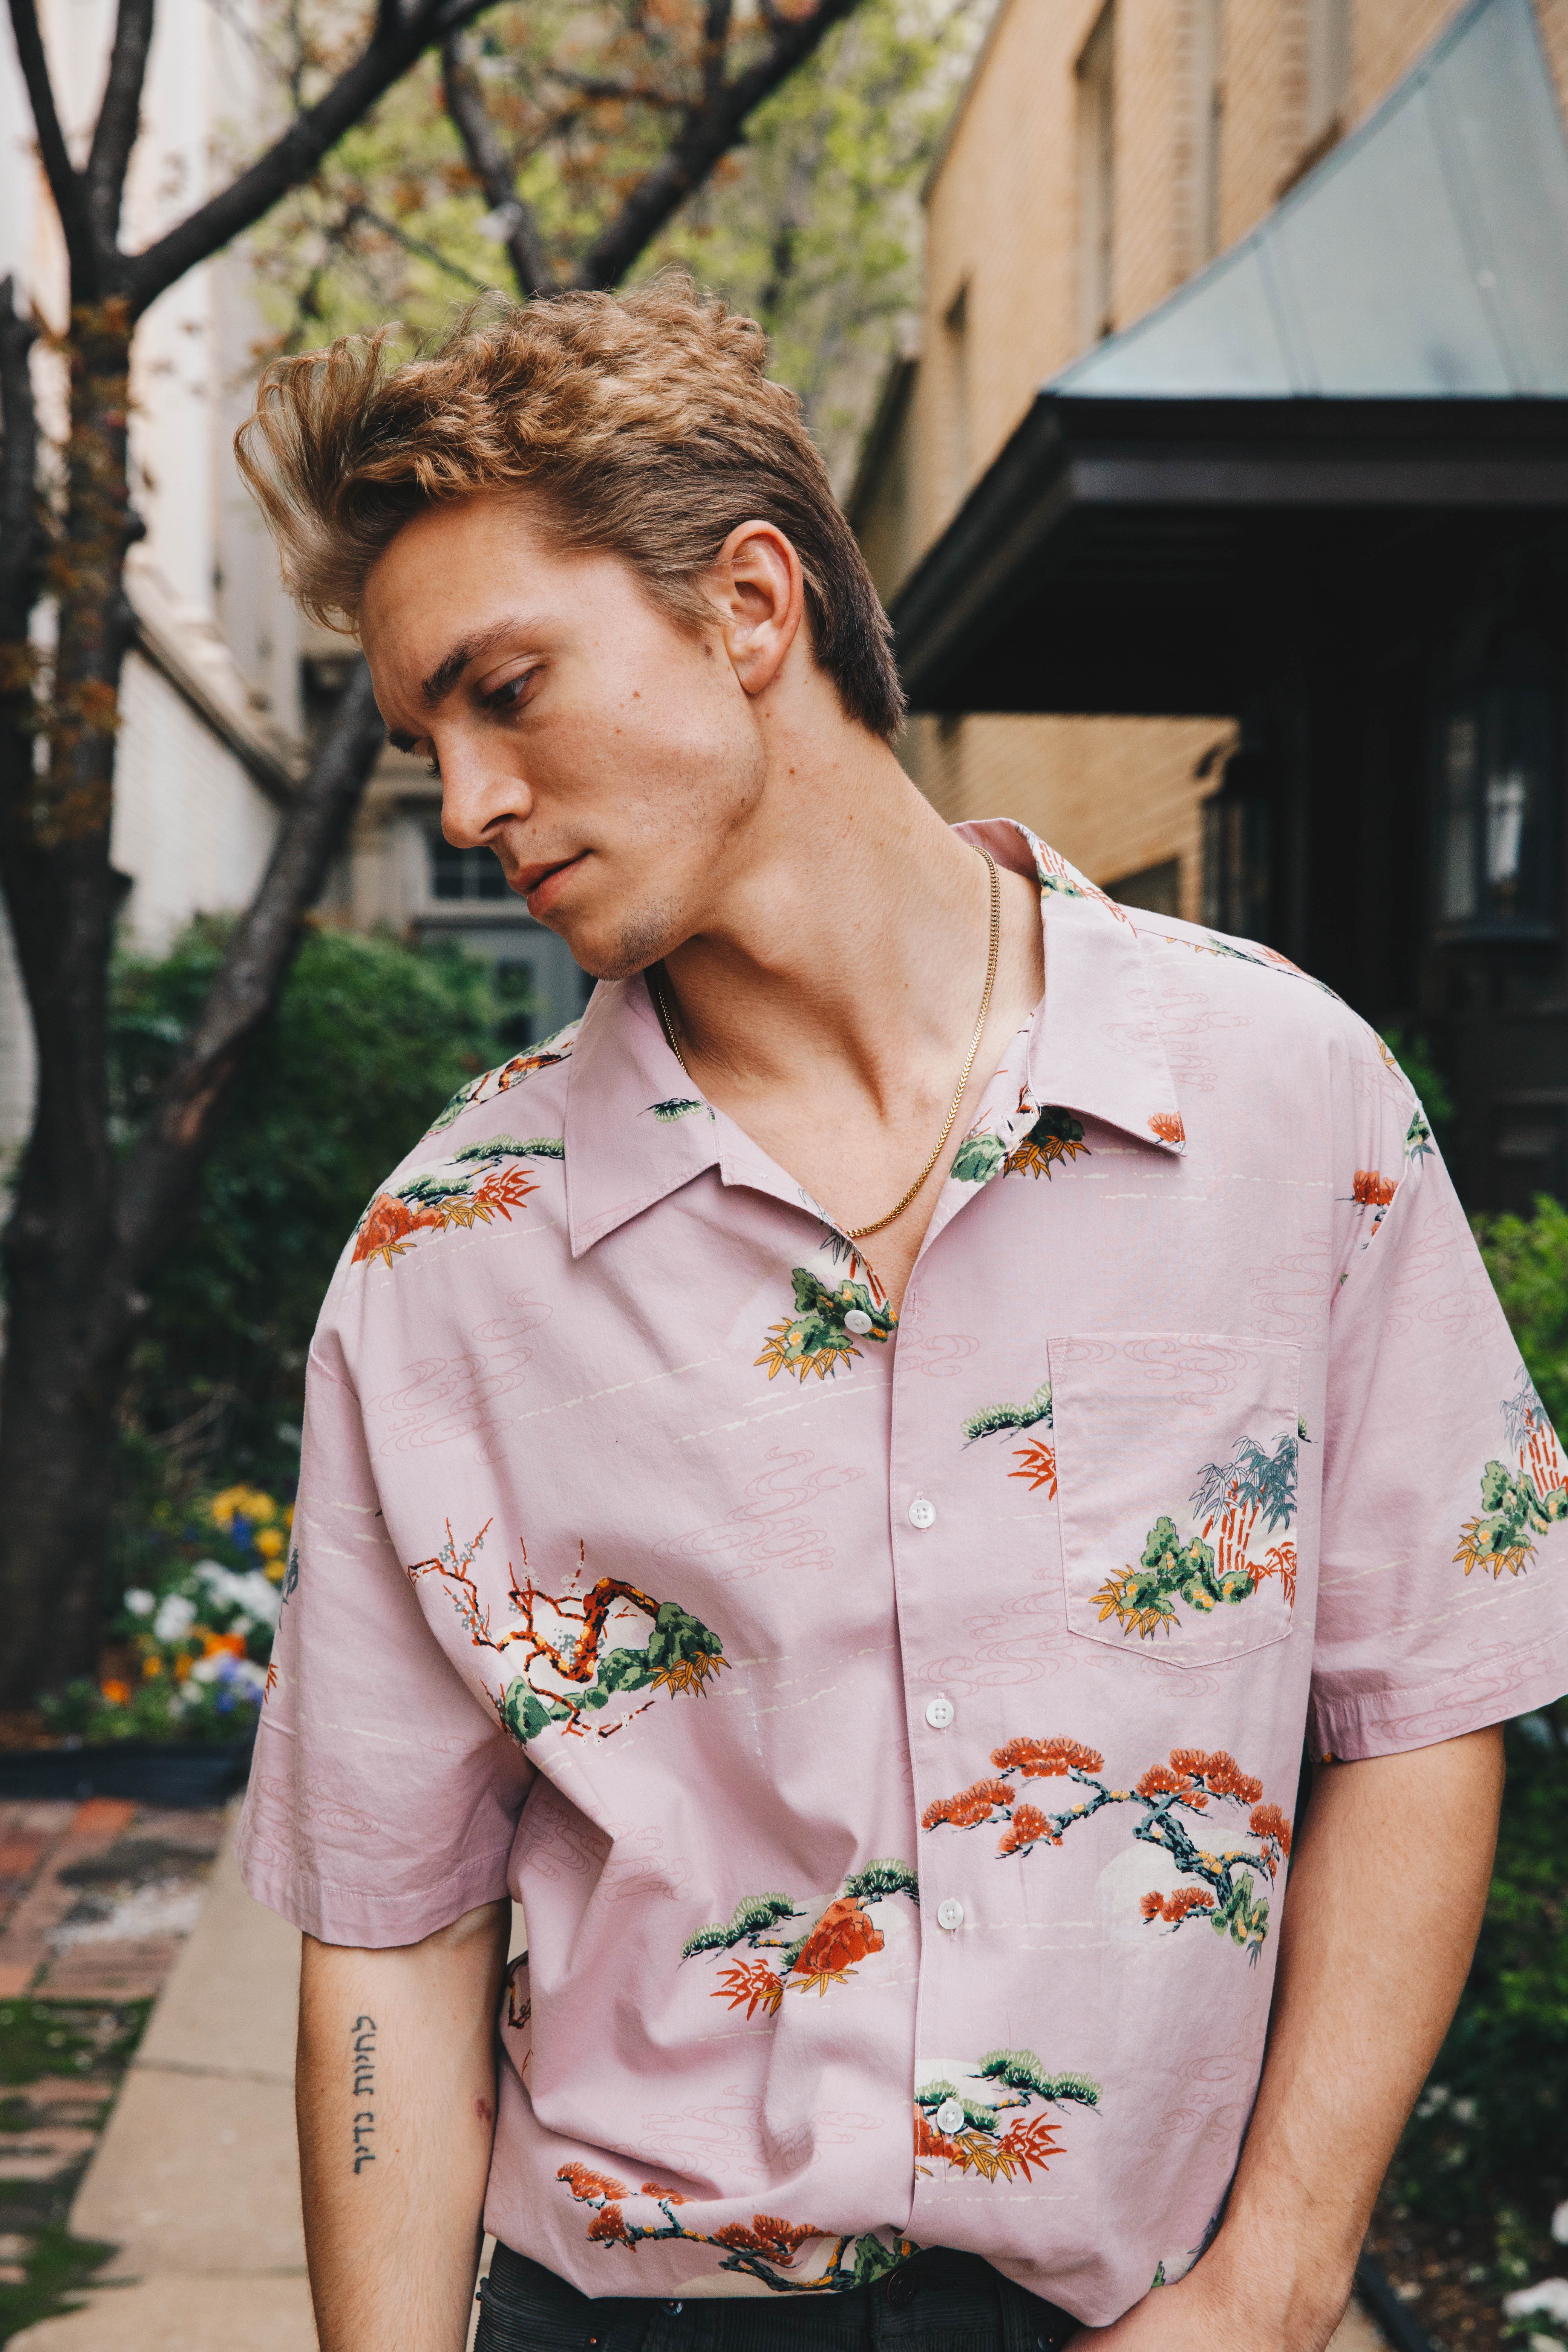 Men's Fashion Tips for Spring 2019 ⋆ Food, Wellness, Lifestyle, & Cannabis